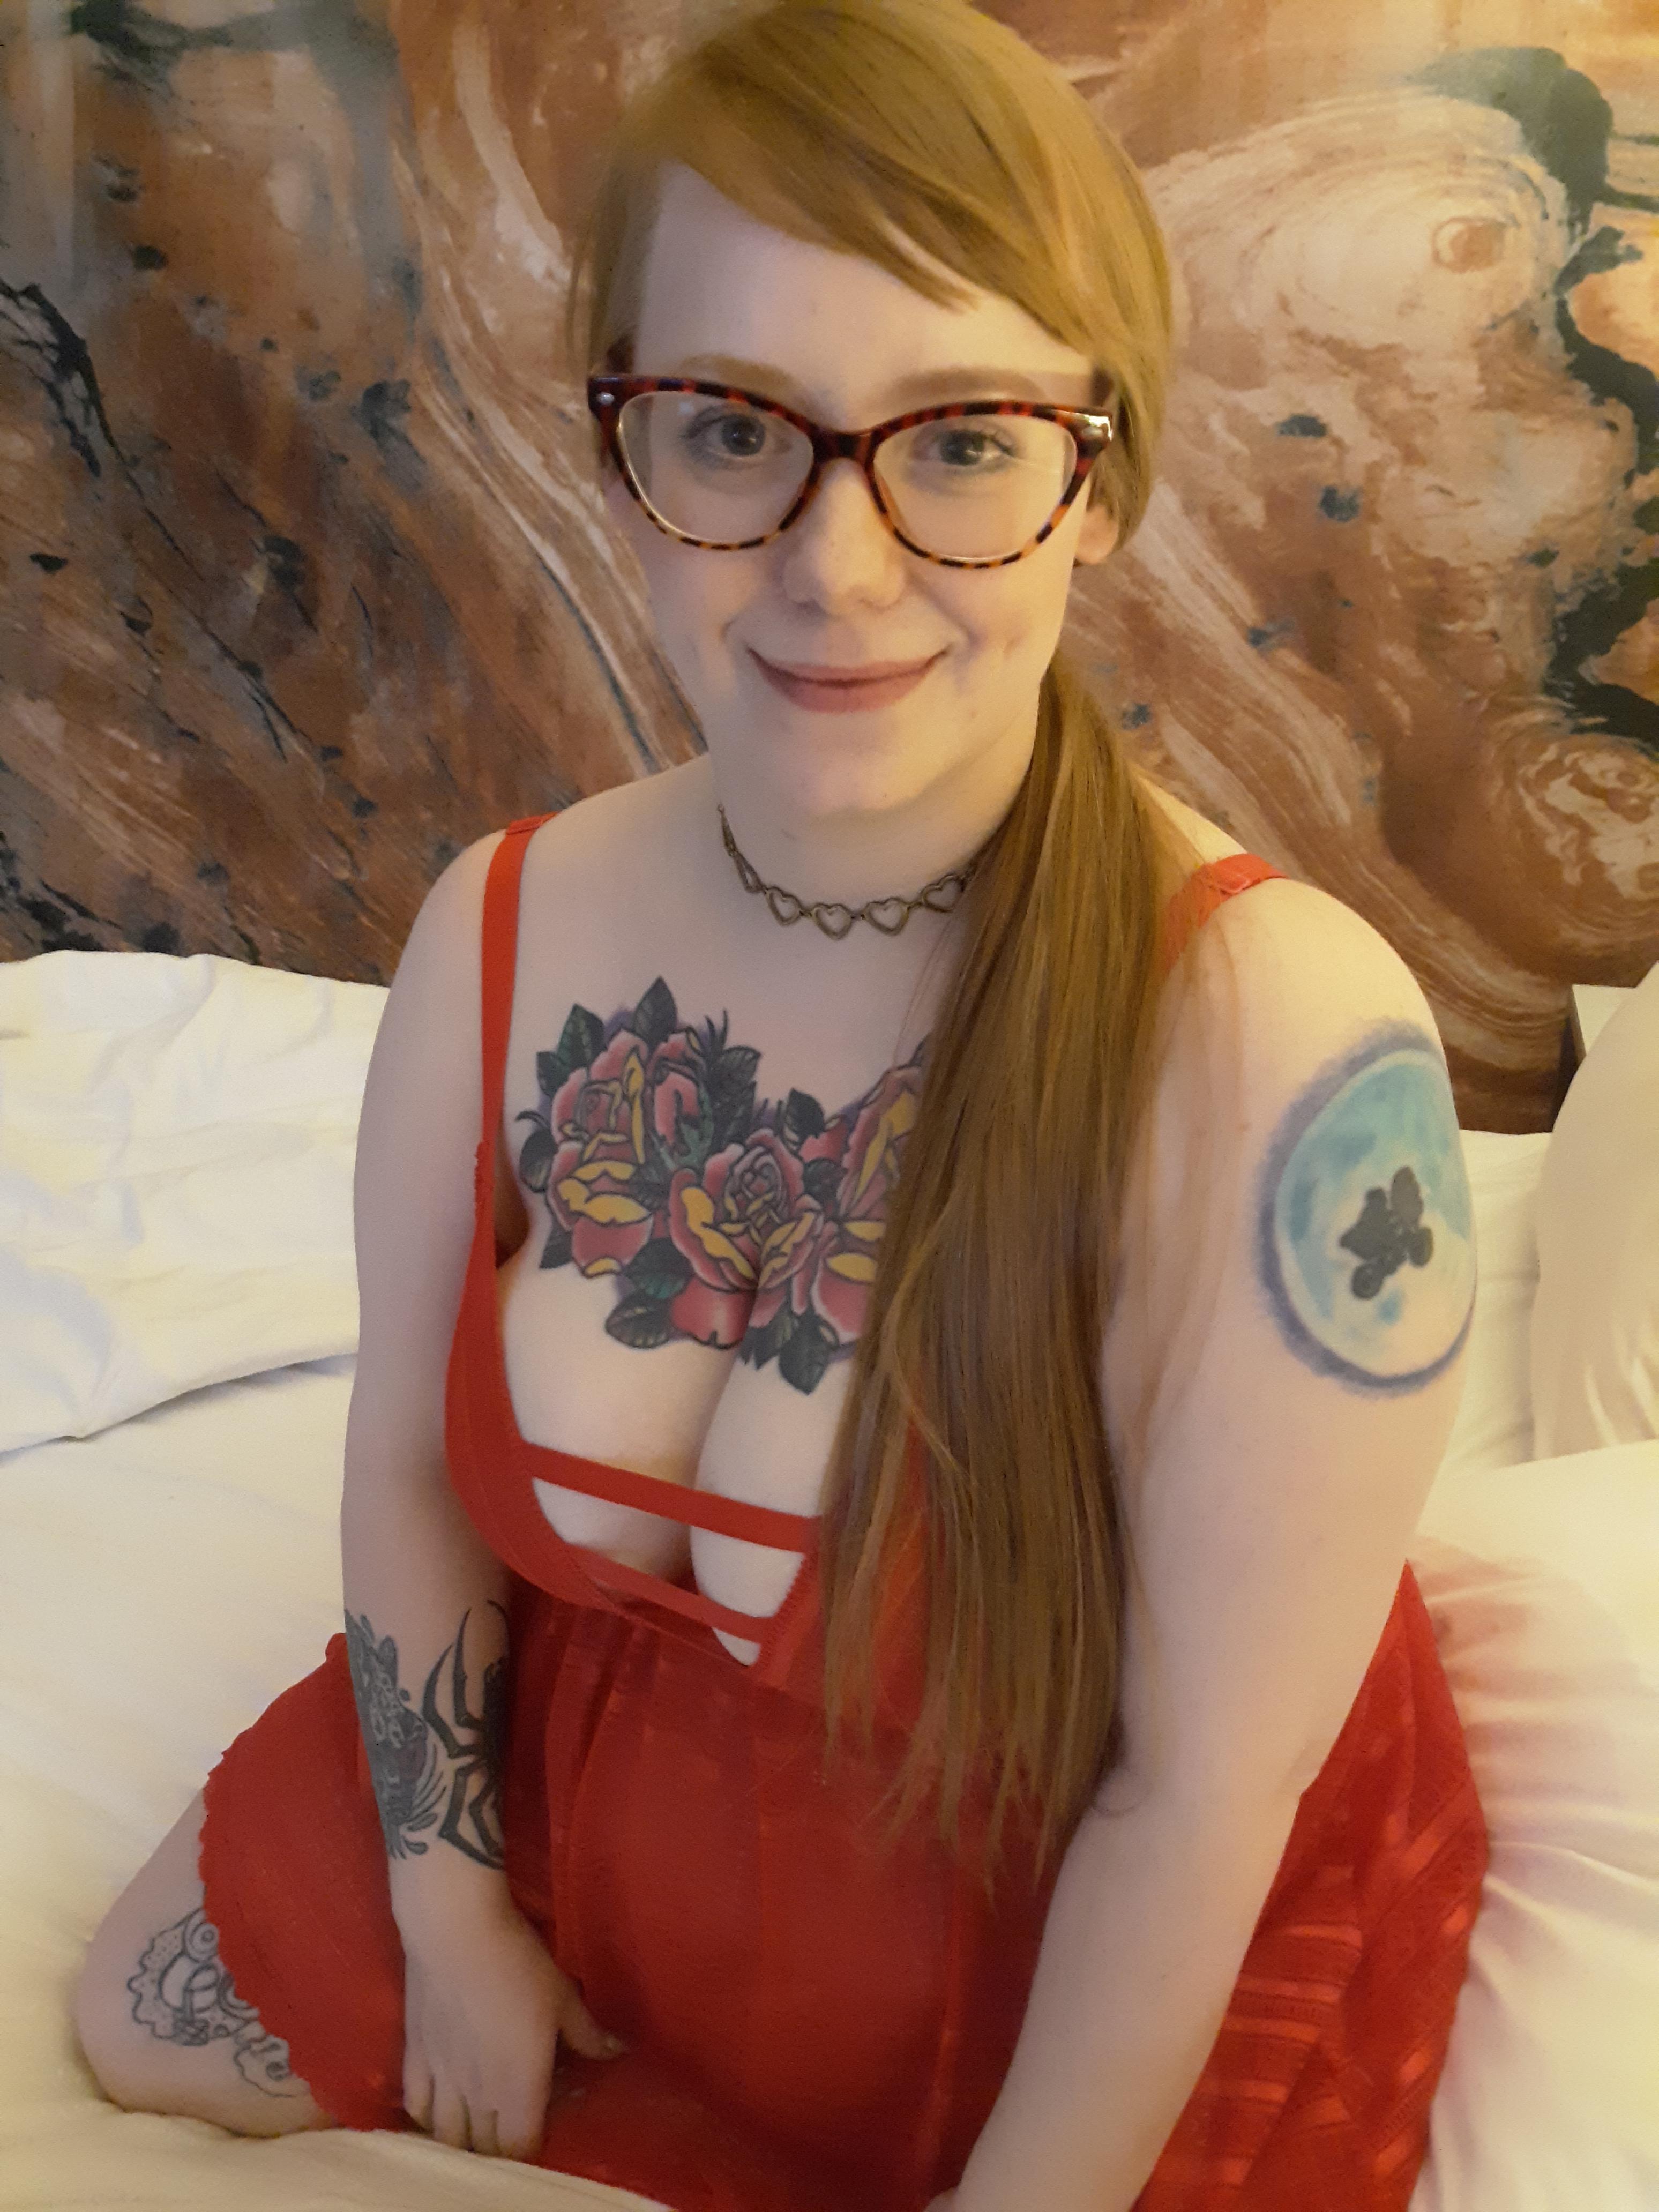 I'm just a chubby lil ginger nerd, but I'll let you cum on my tits after  you fuck my ass Ã°Å¸Ëœâ€¡ Porno Photo - EPORNER